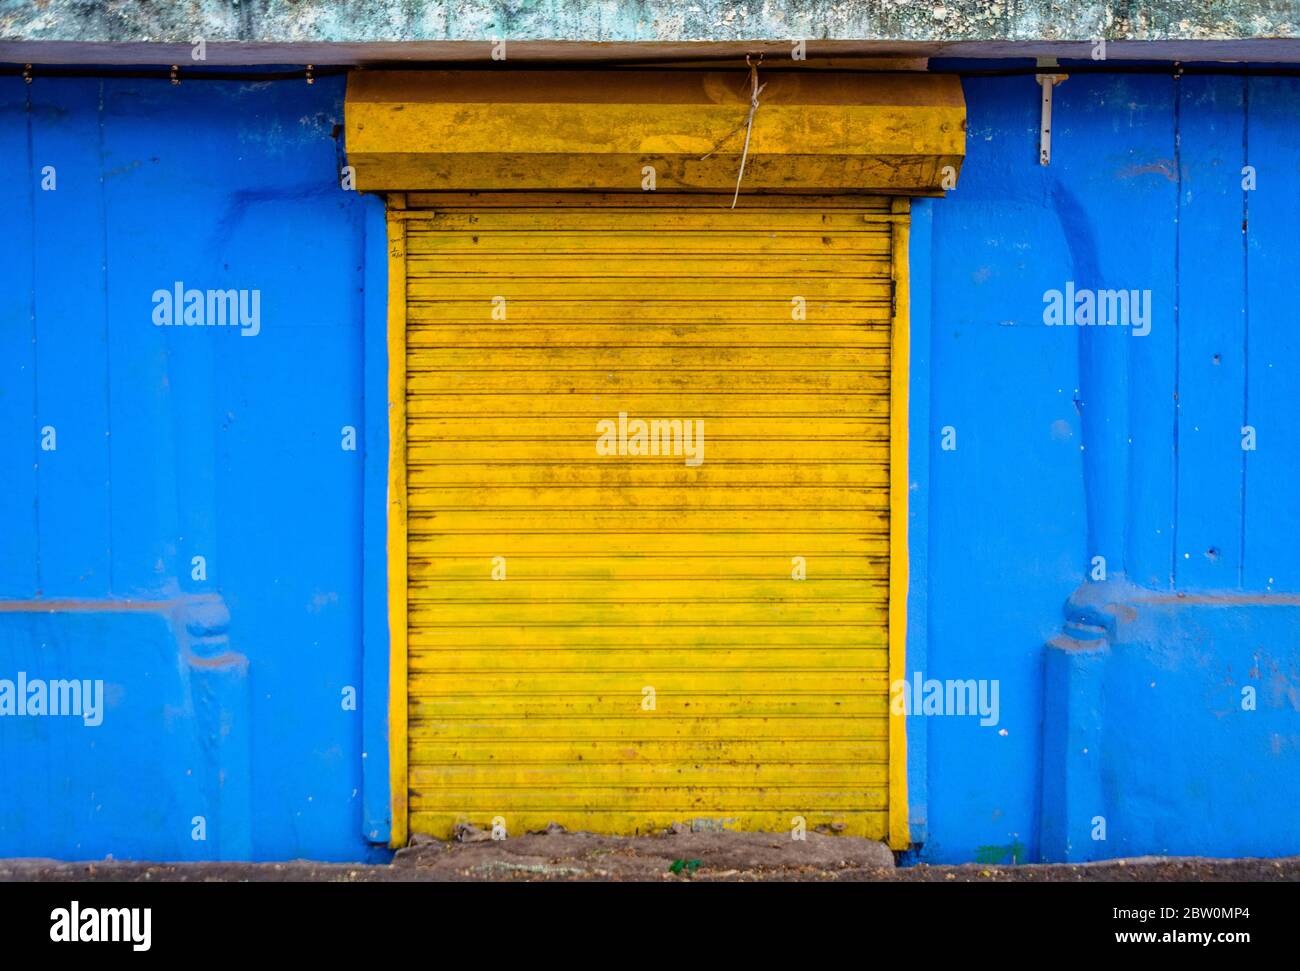 Natural street side frame of bright yellow closed shutter of a shop and bright blue walls on either side creating colour contrast. Stock Photo